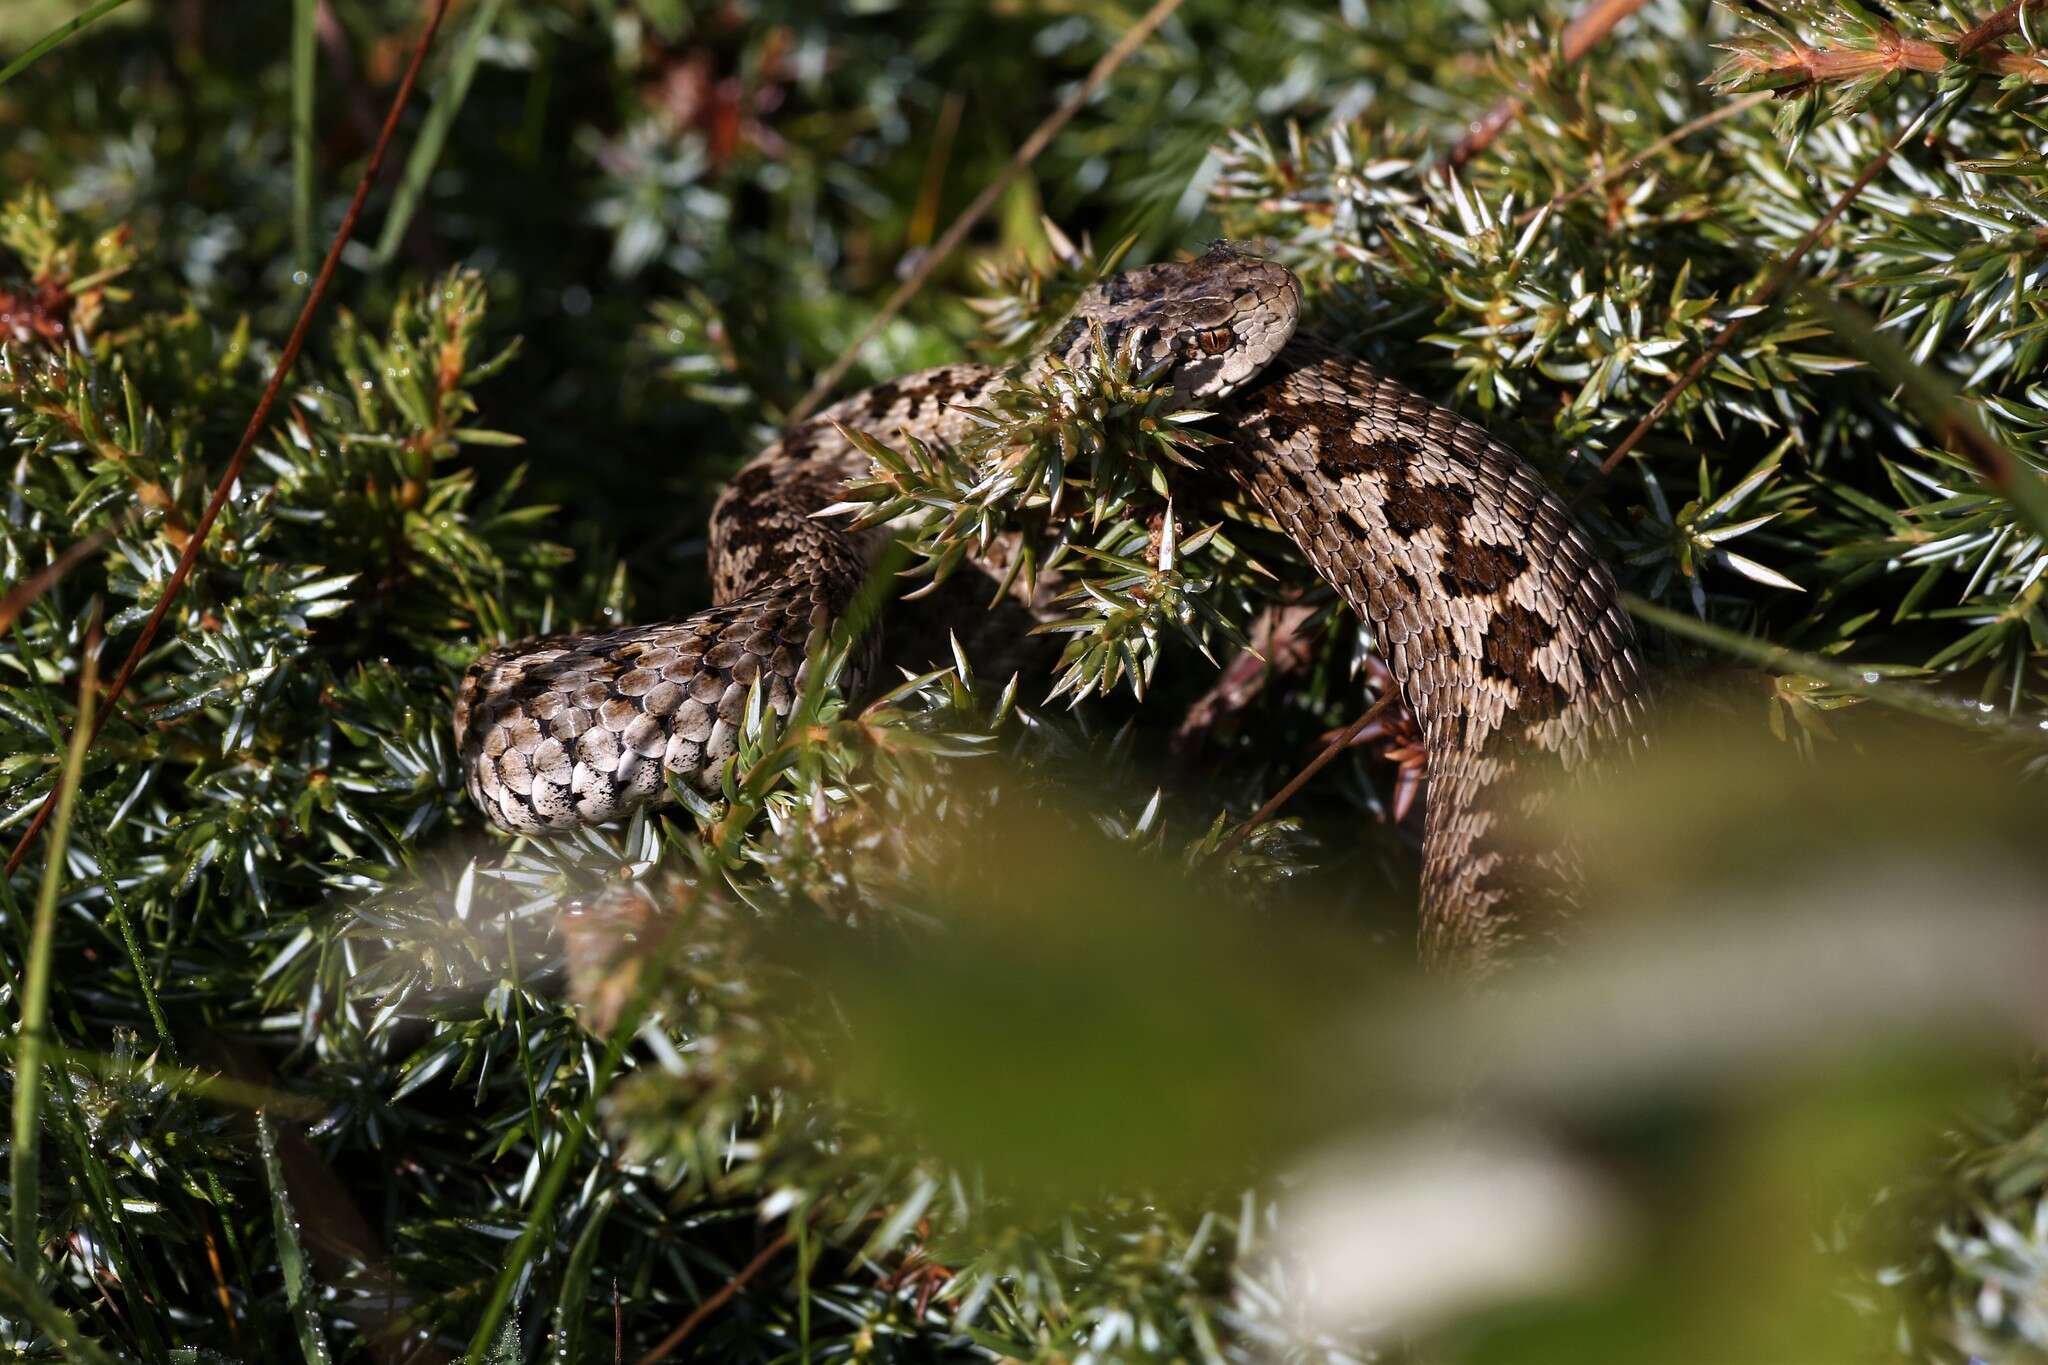 Image of Meadow Viper